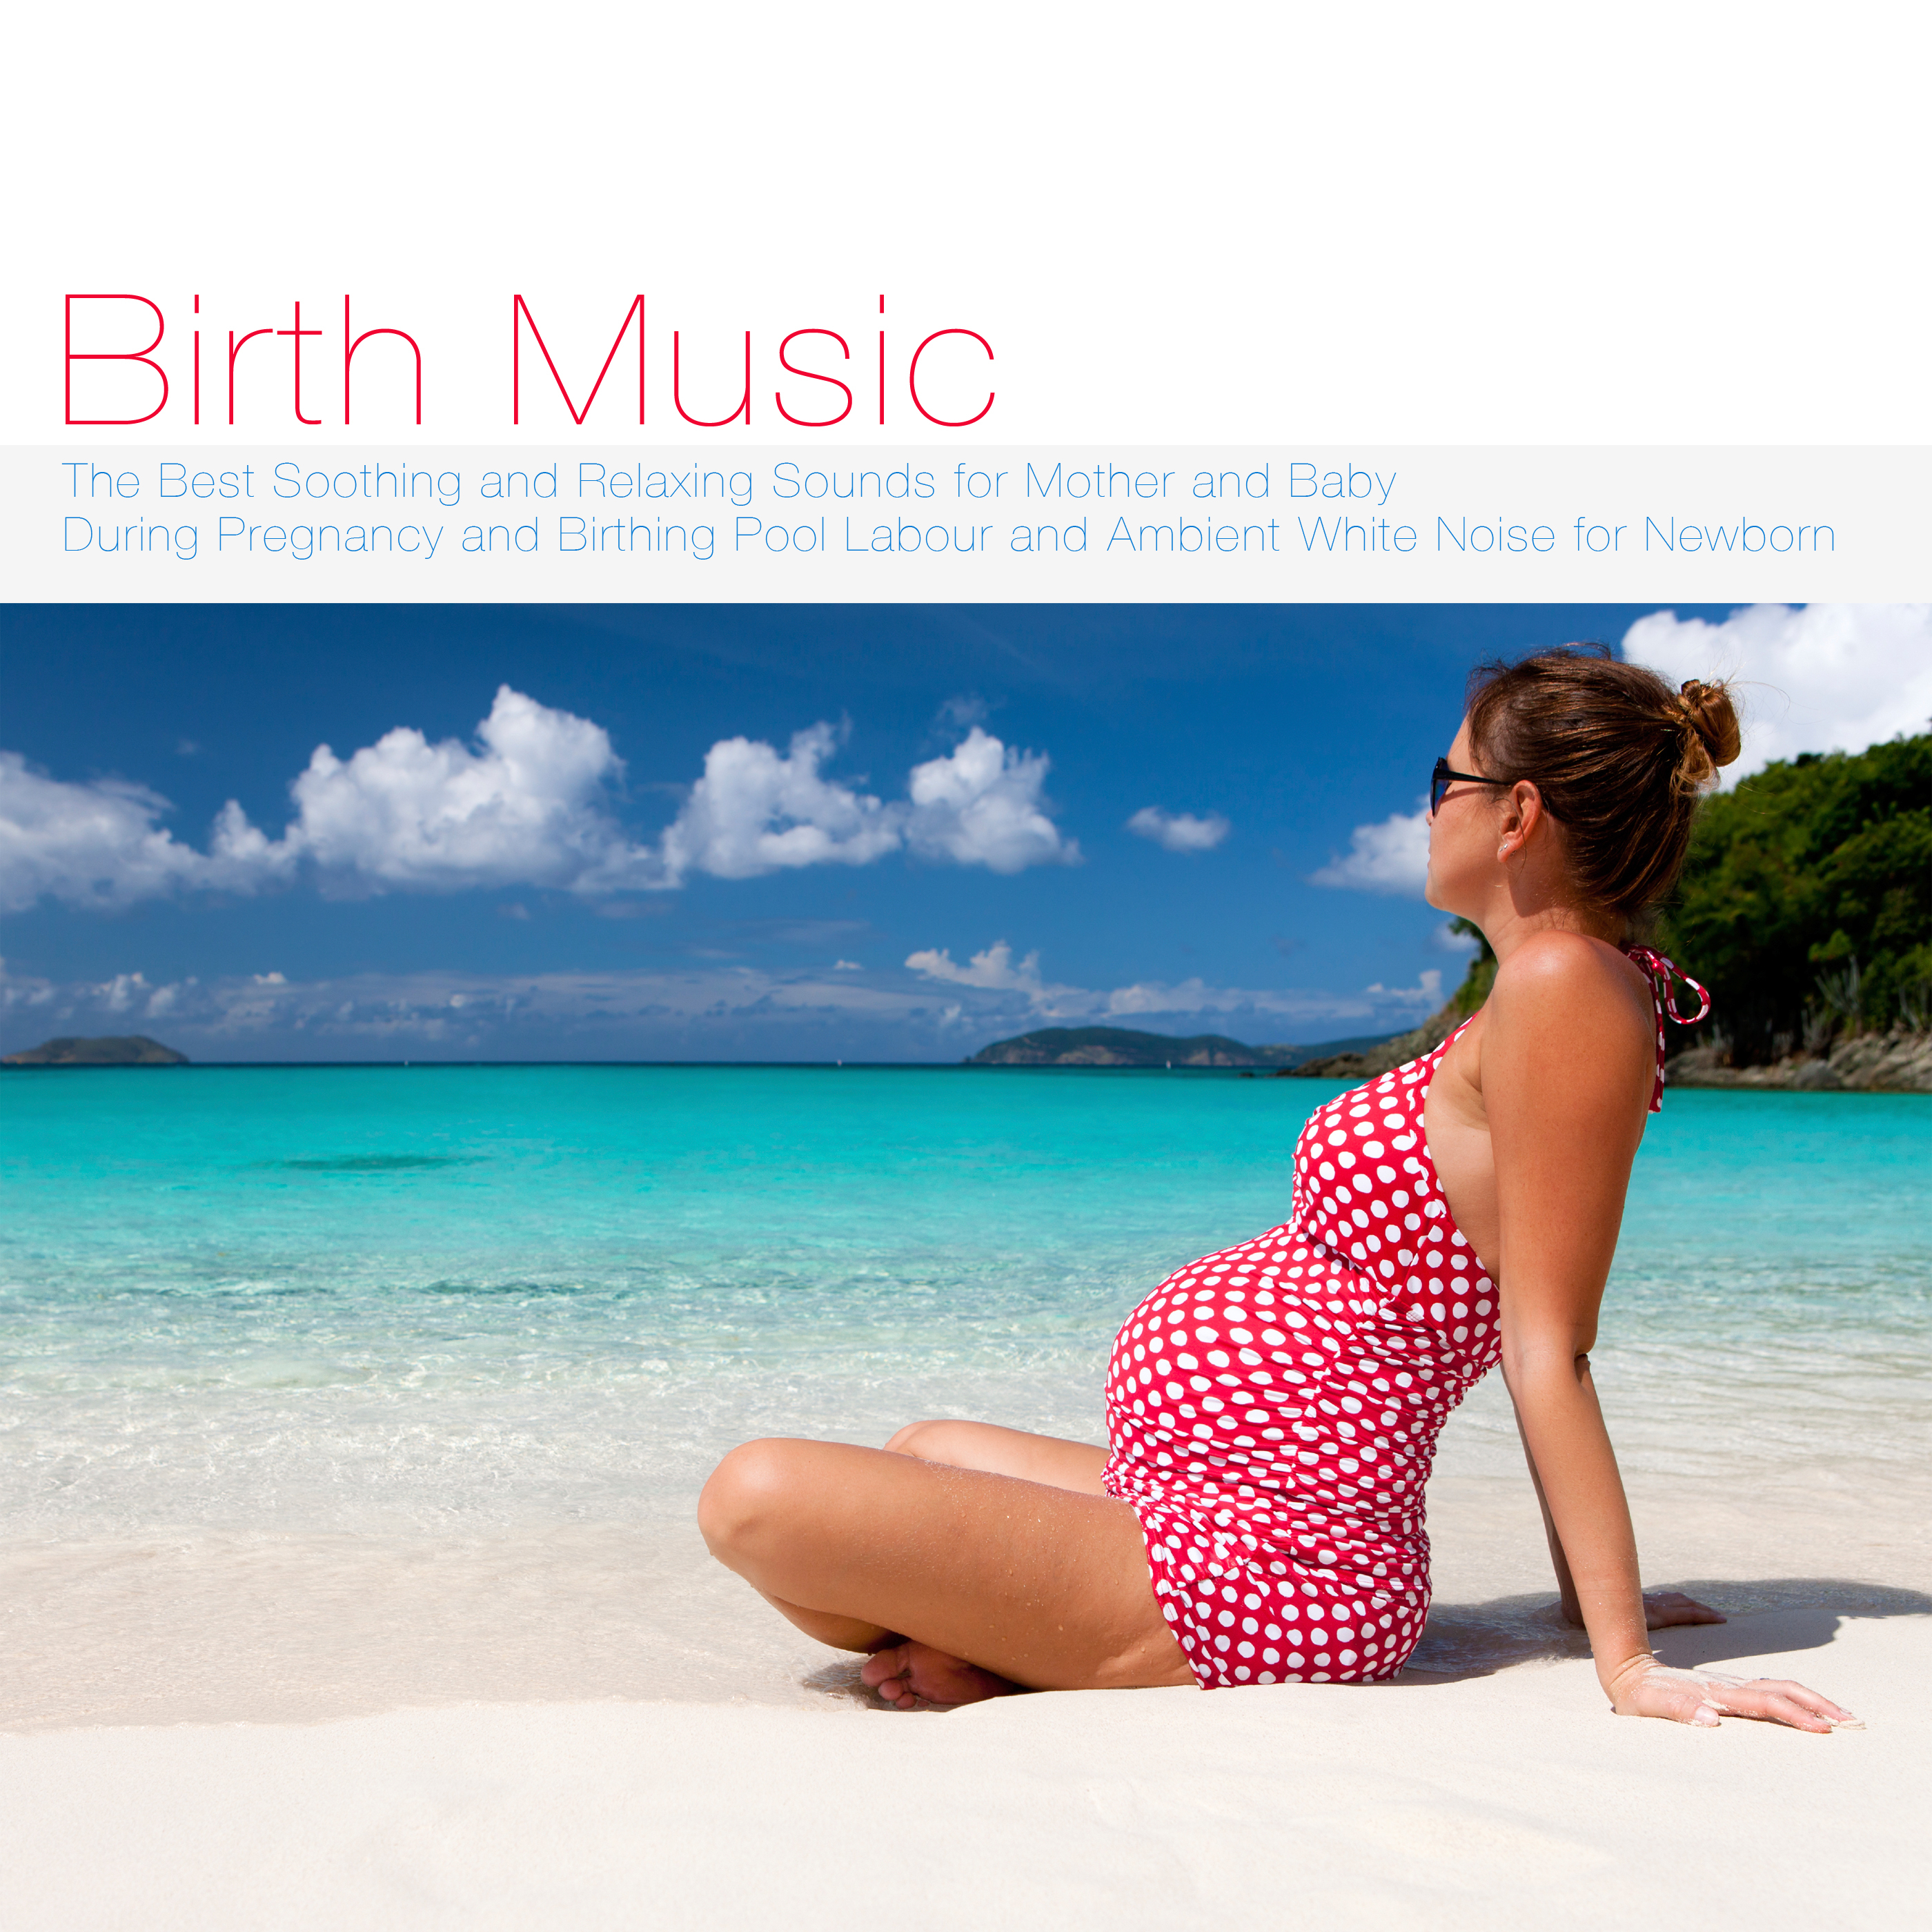 Birth Music: The Best Soothing and Relaxing Sounds for Mother and Baby During Pregnancy and Birthing Pool Labour, or Labor and Ambient White Noise for Newborn